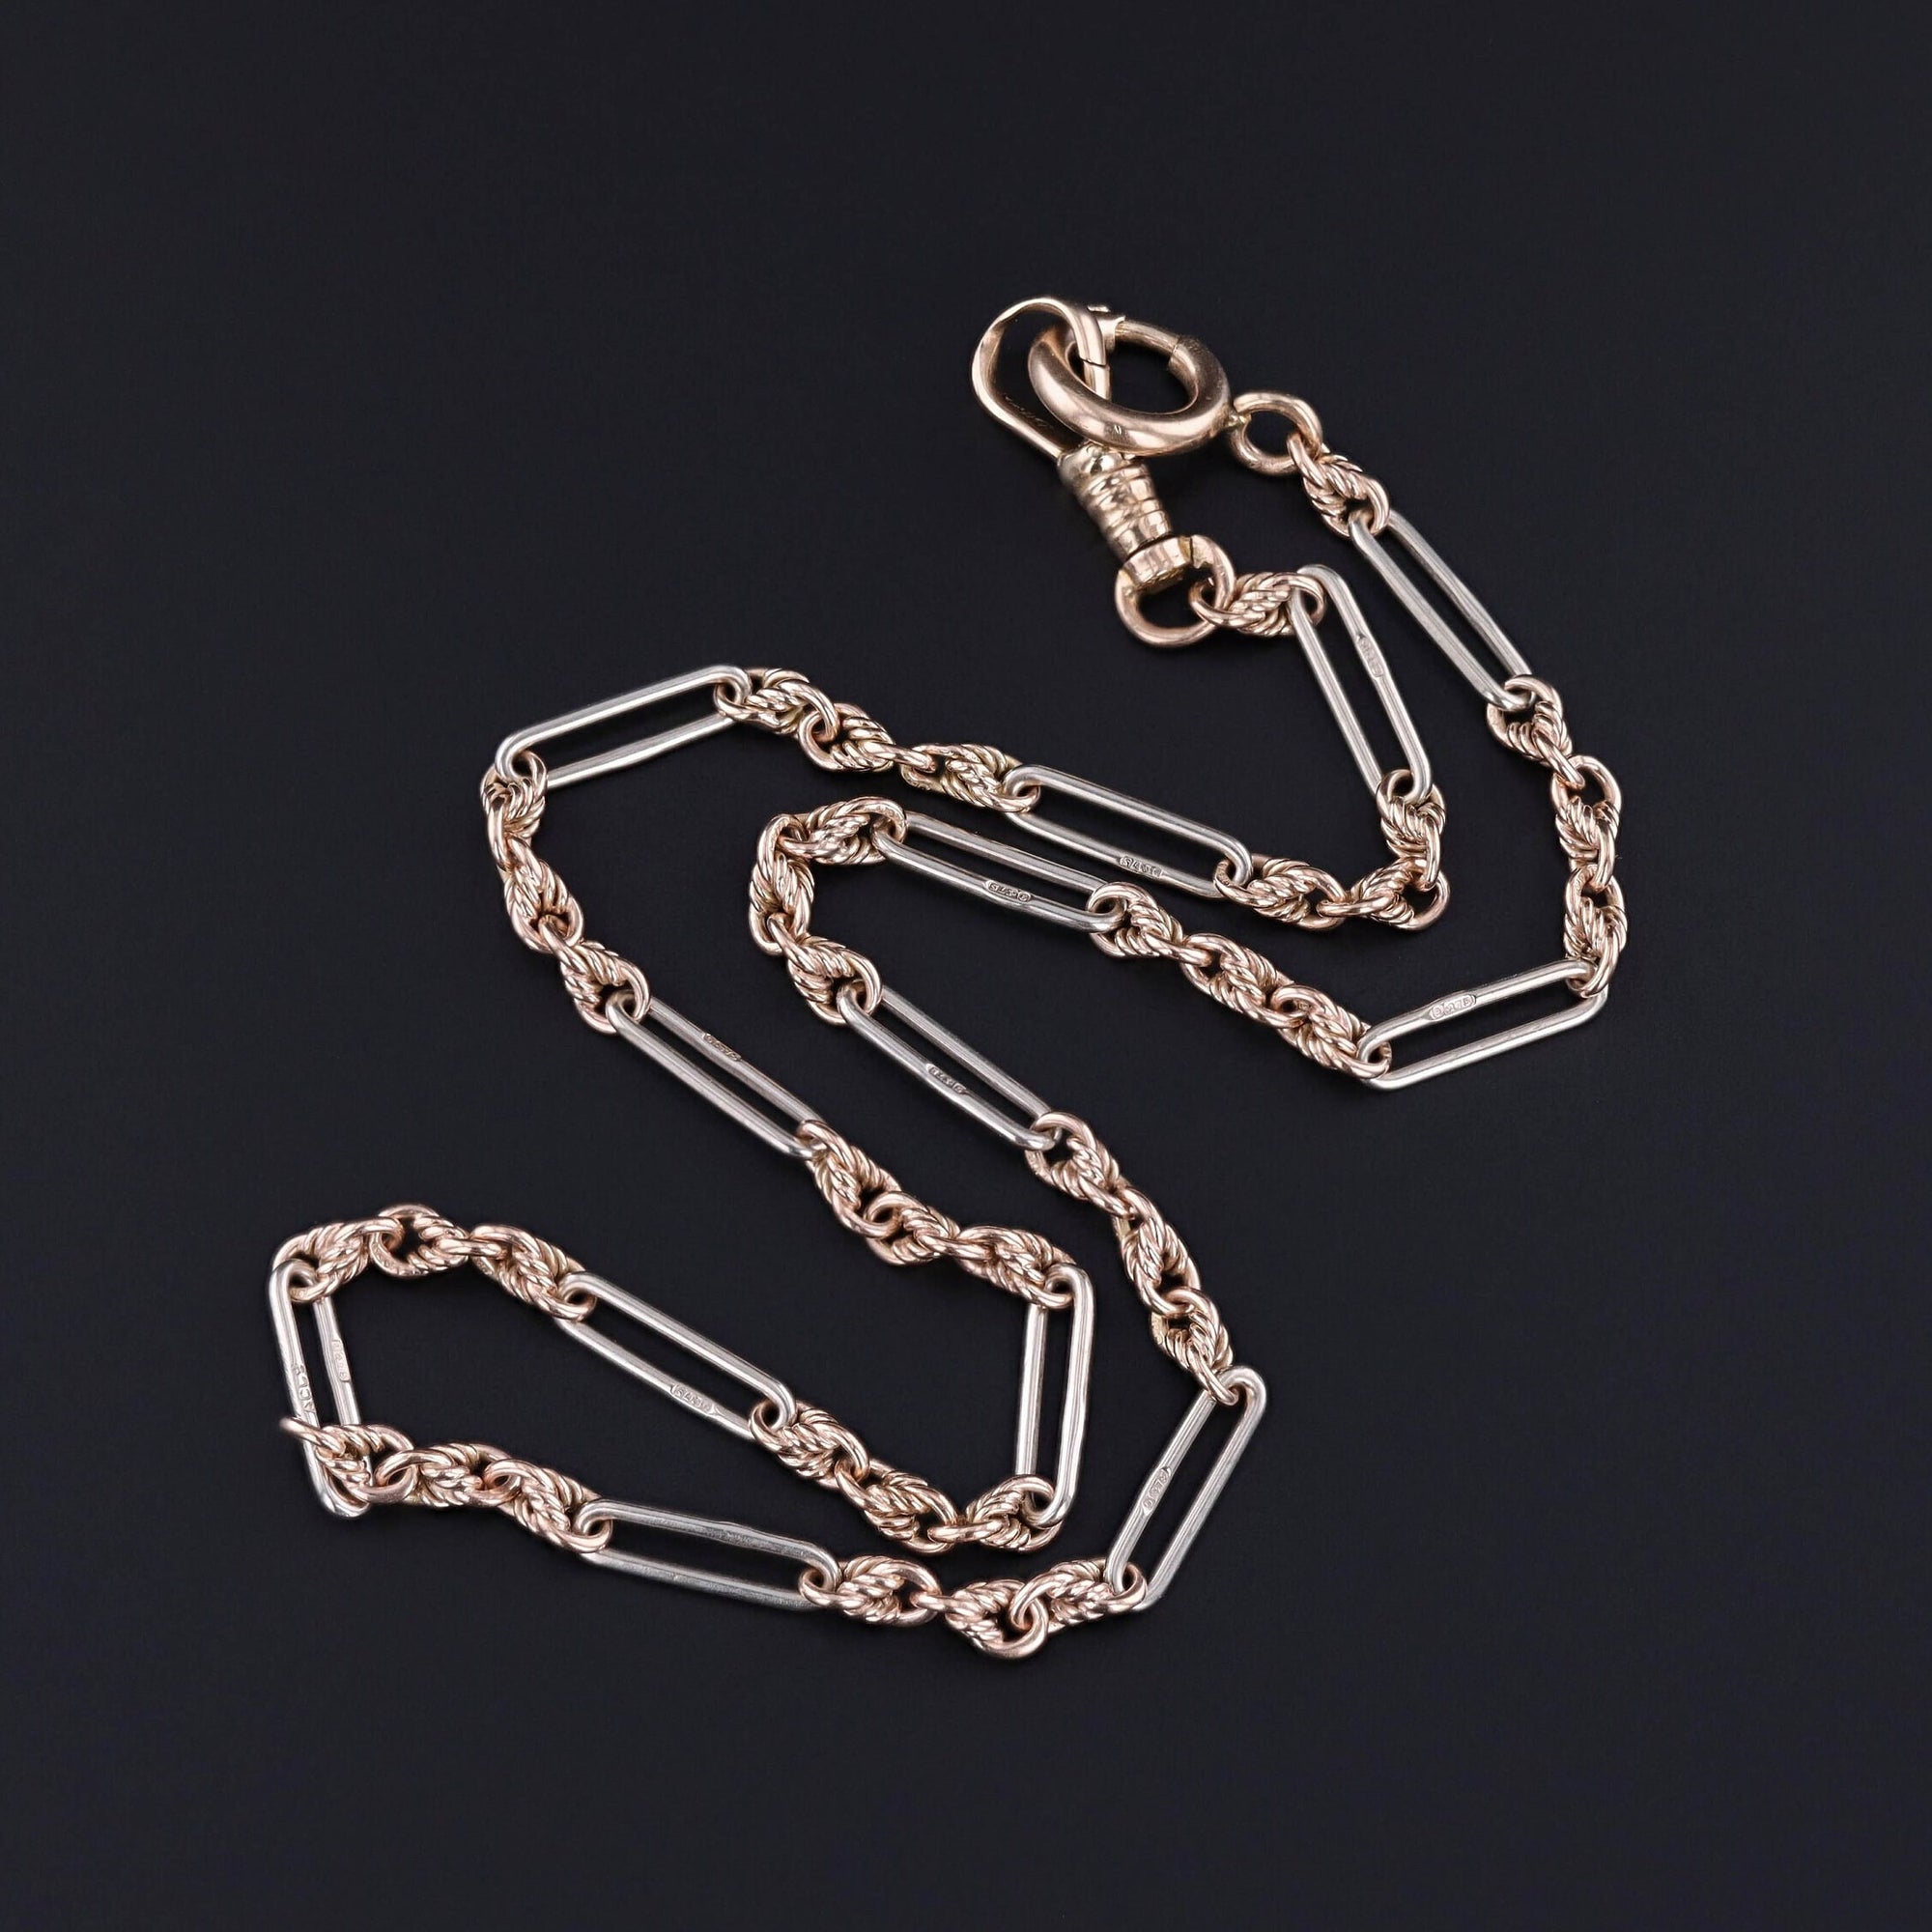 Vintage Watch Chain of 10k White & Rose Gold